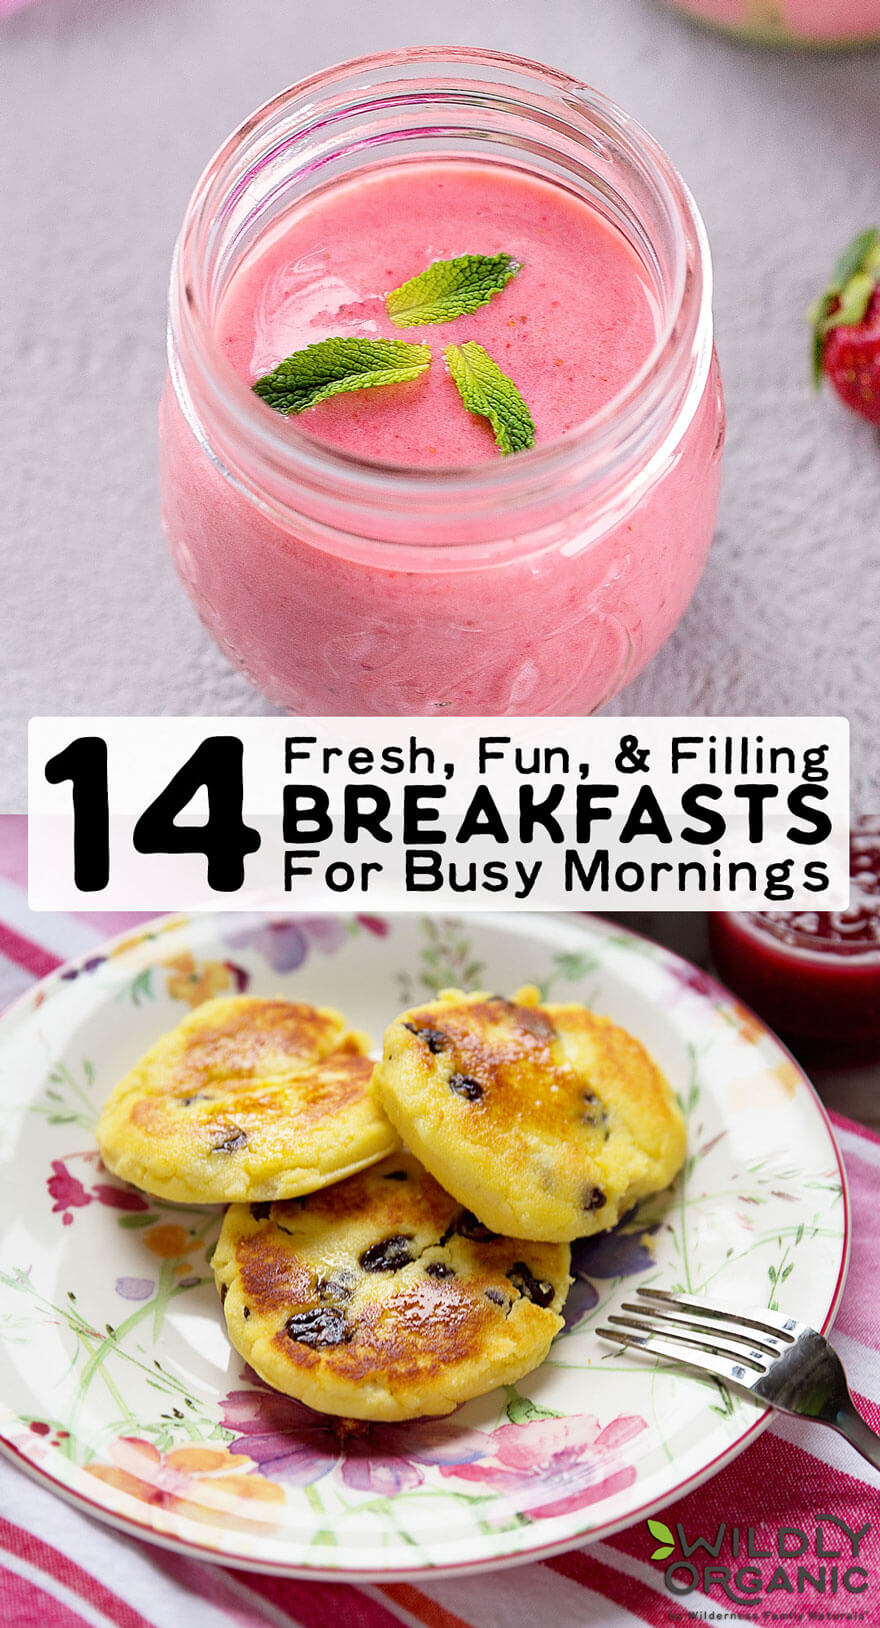 14 Fresh, Fun, & Filling Breakfasts For Busy Mornings | The start of a new school year means it's time to think about the most important part of your child's day... Breakfast! Add these fresh, fun, and filling breakfasts for busy mornings to your arsenal and say hello to stress-free mornings! | WildlyOrganic.com